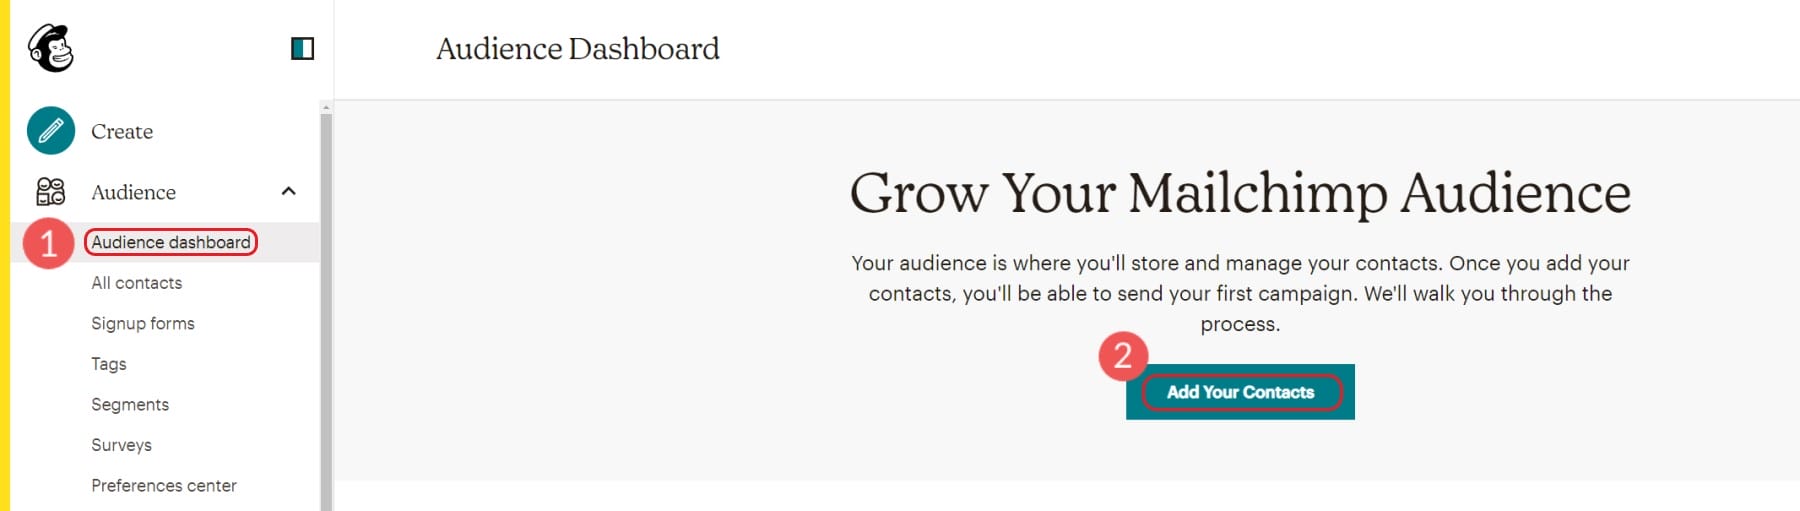 Step 1 - Add Contacts to Audience